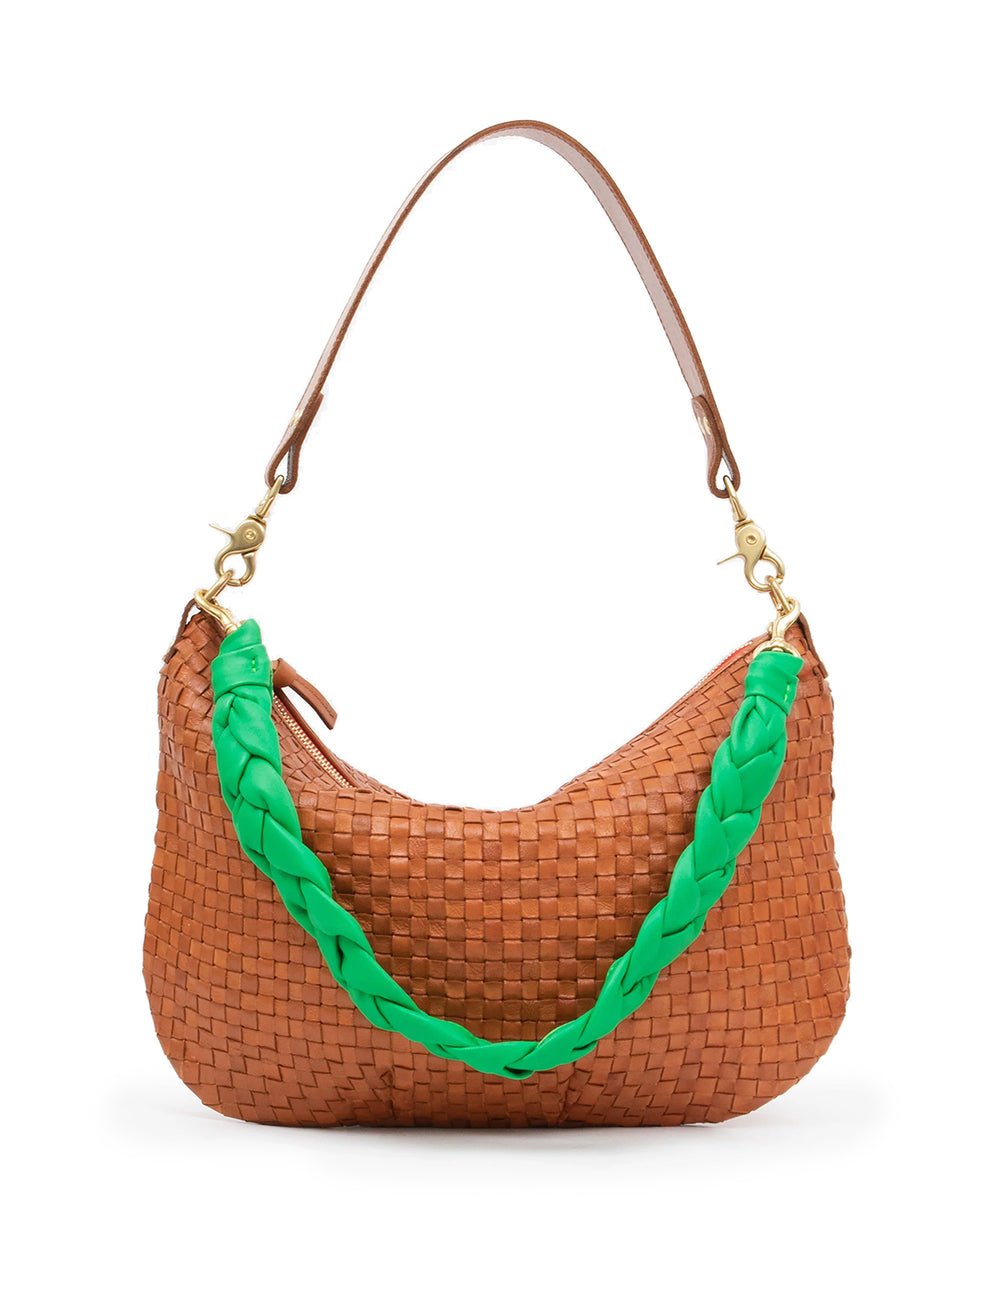 braided shoulder strap in parrot green attached to moyen messanger bag